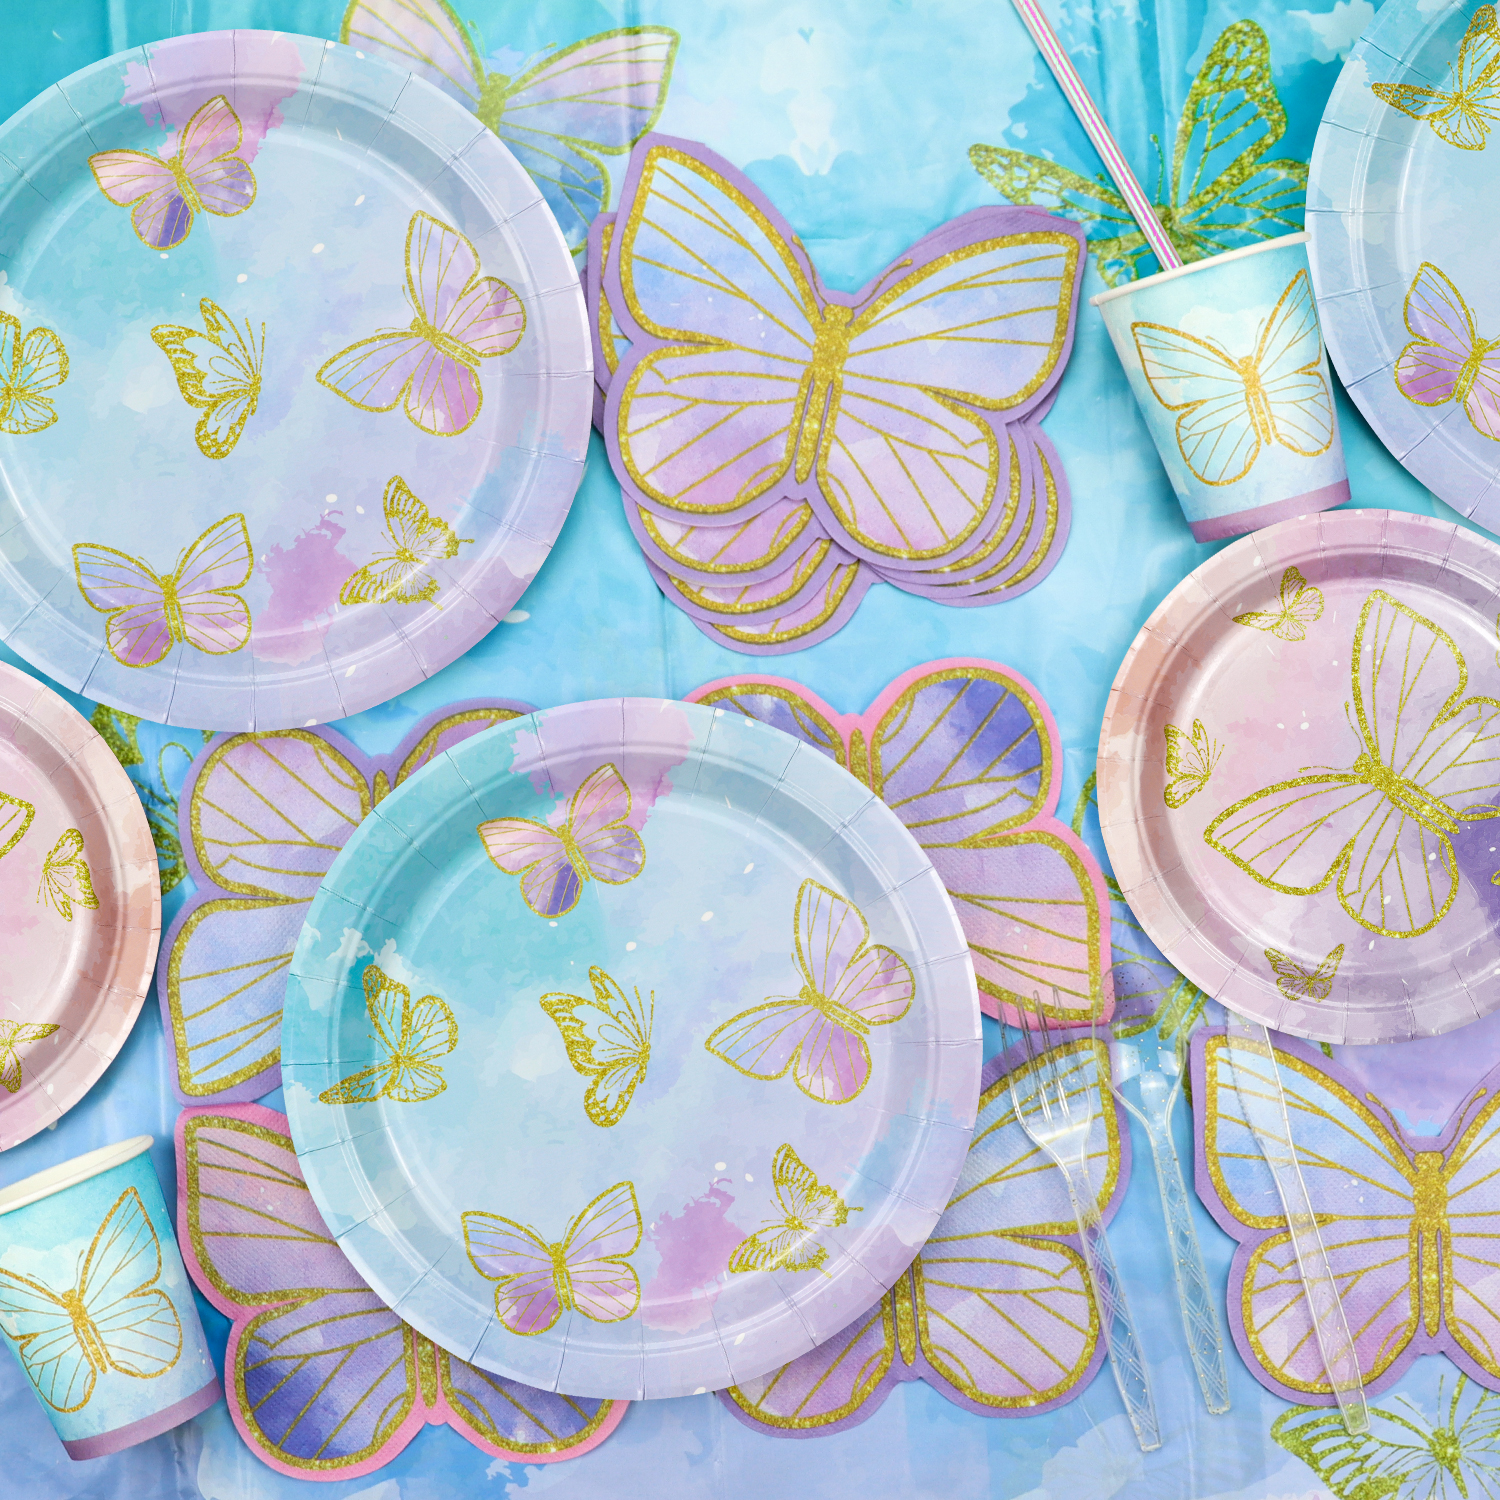 166 Pcs Butterfly Birthday Decorations - Including Butterfly Paper Plates, Napkins, Cups, Tablecloth and Straws for Fairy Birthday Decorations Butterfly Birthday Party Supplies, Serve 20 - image 5 of 7